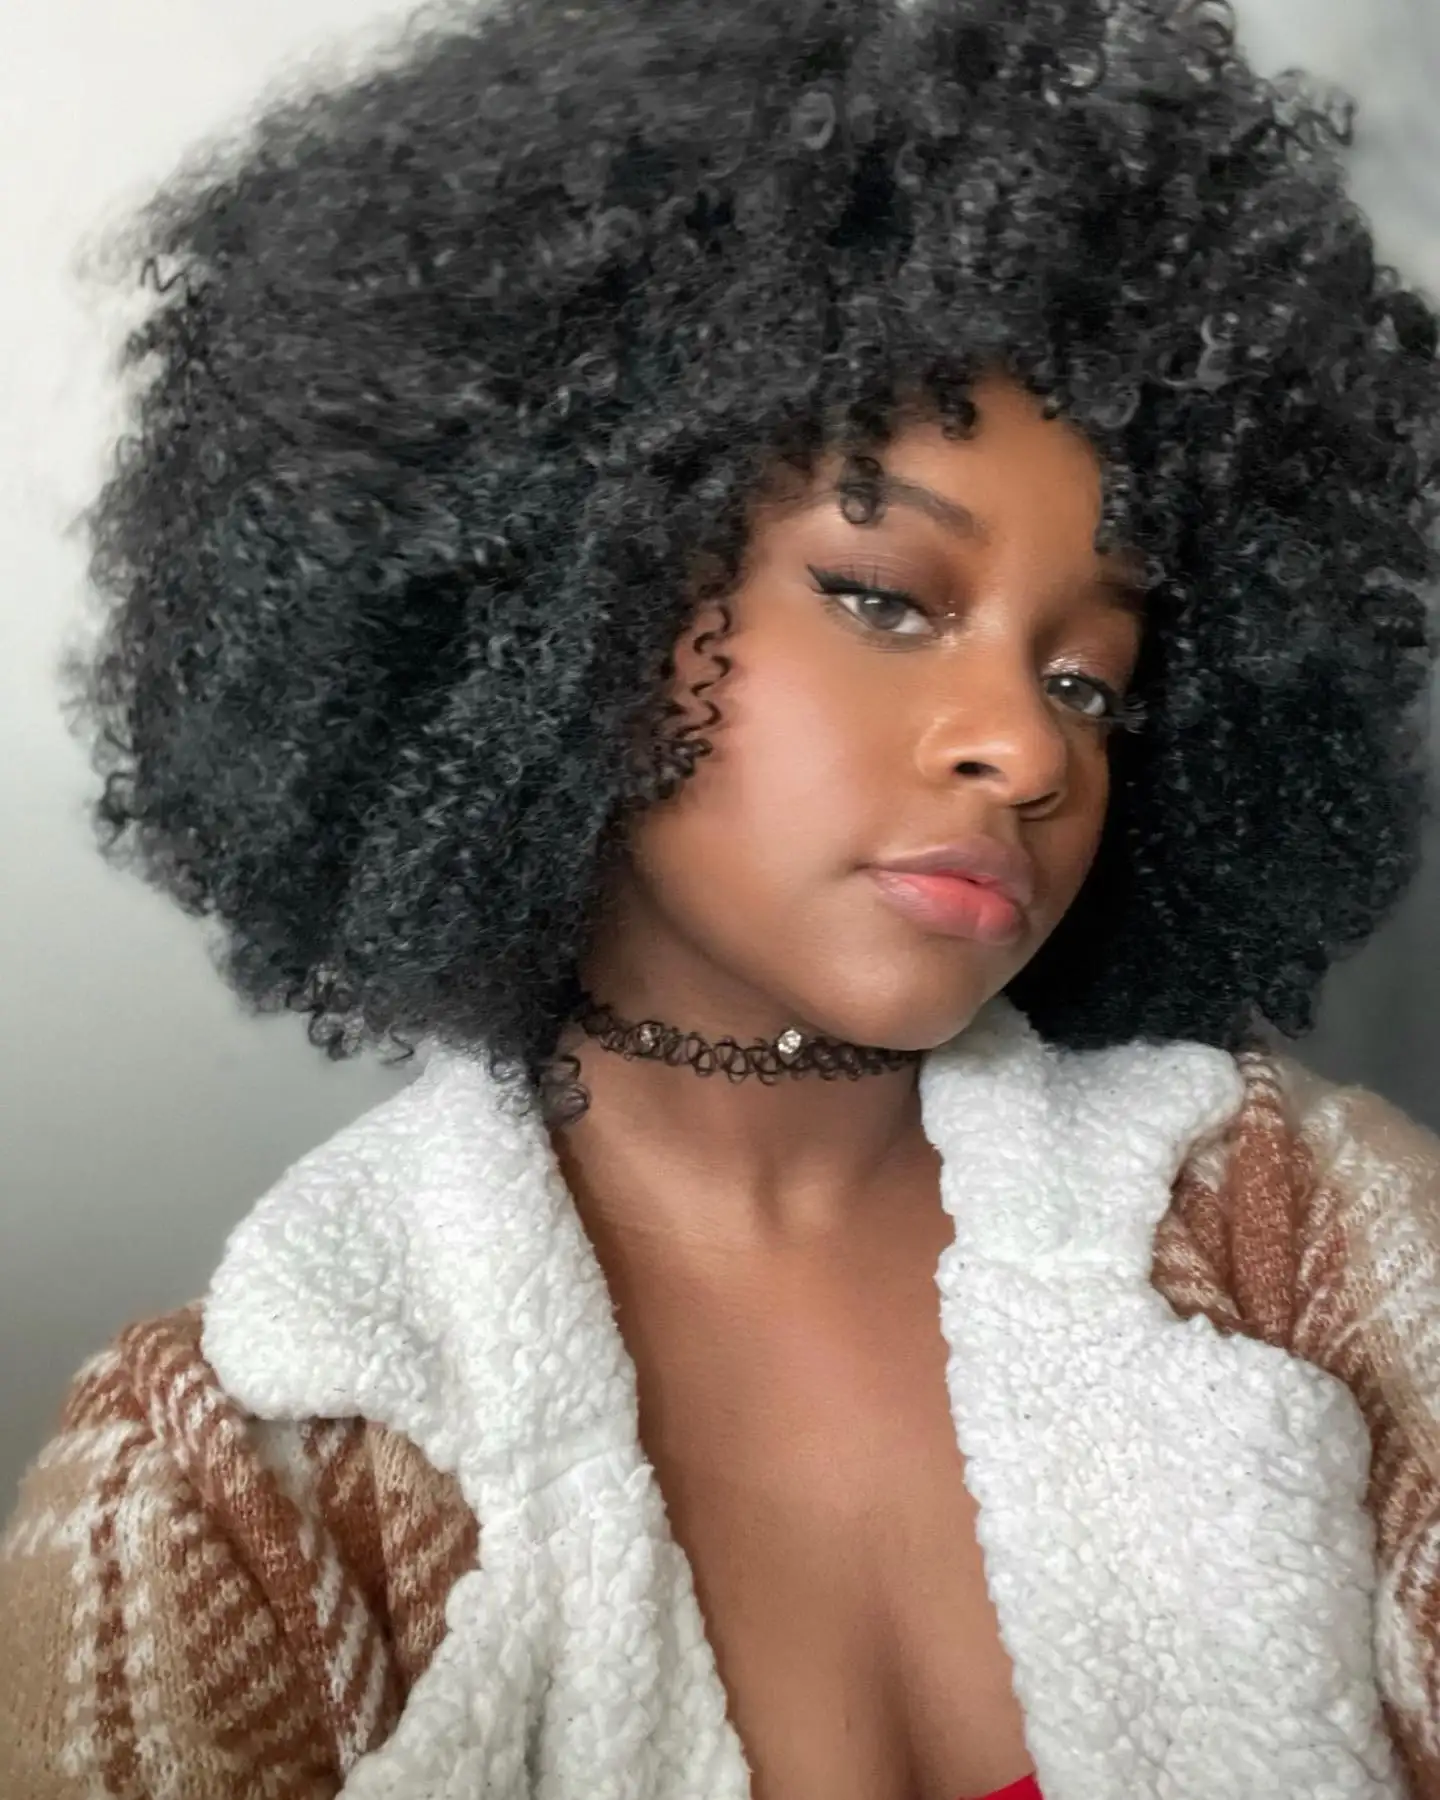 Black Girl with Curly Fro Hairstyle